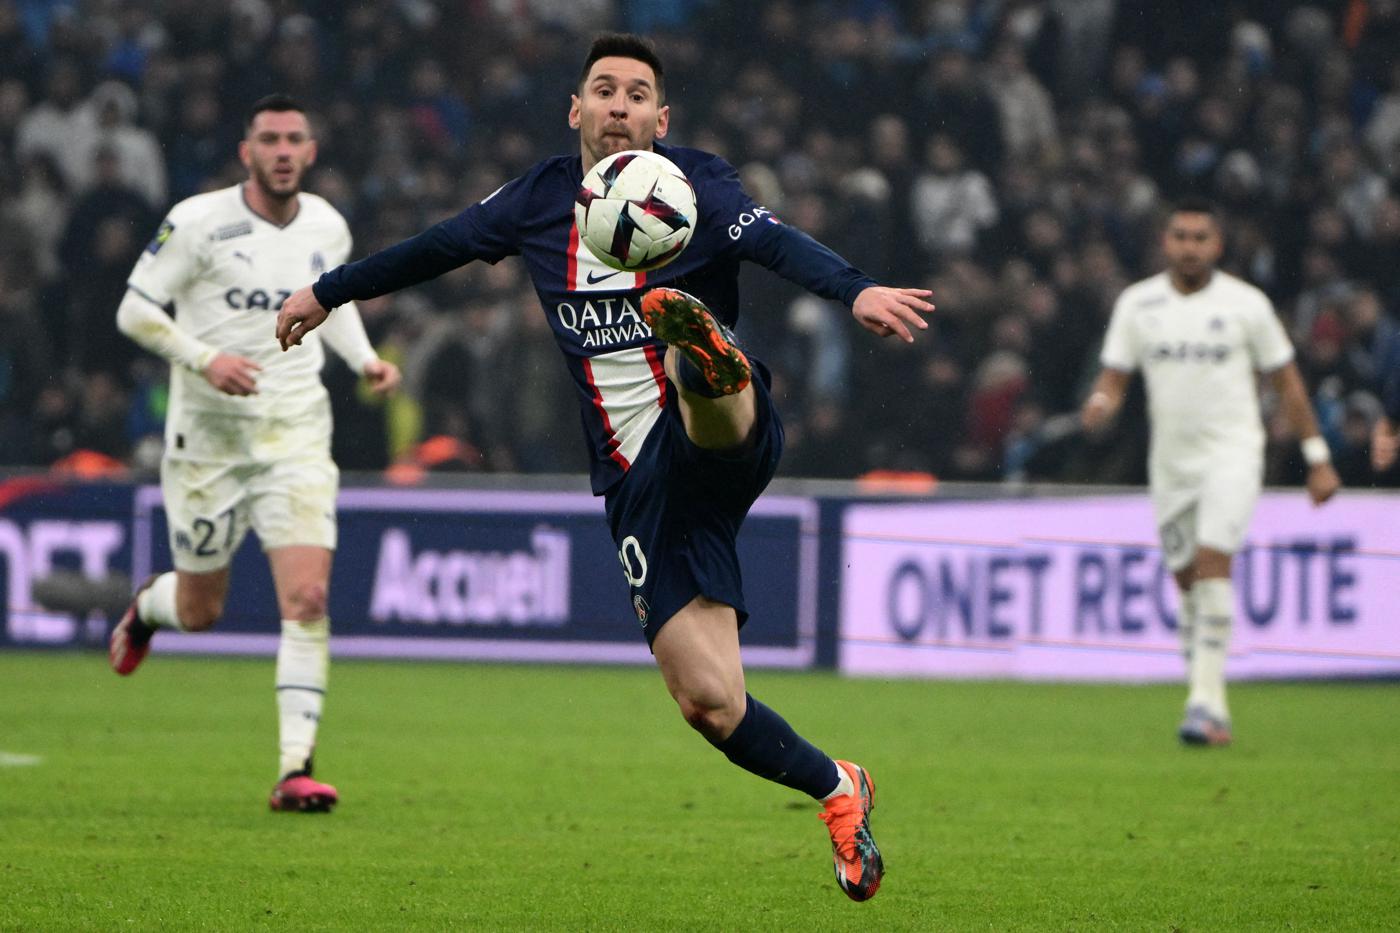 Marseille - PSG - 0:3. French Premier League, 25th round. Match review, statistics.